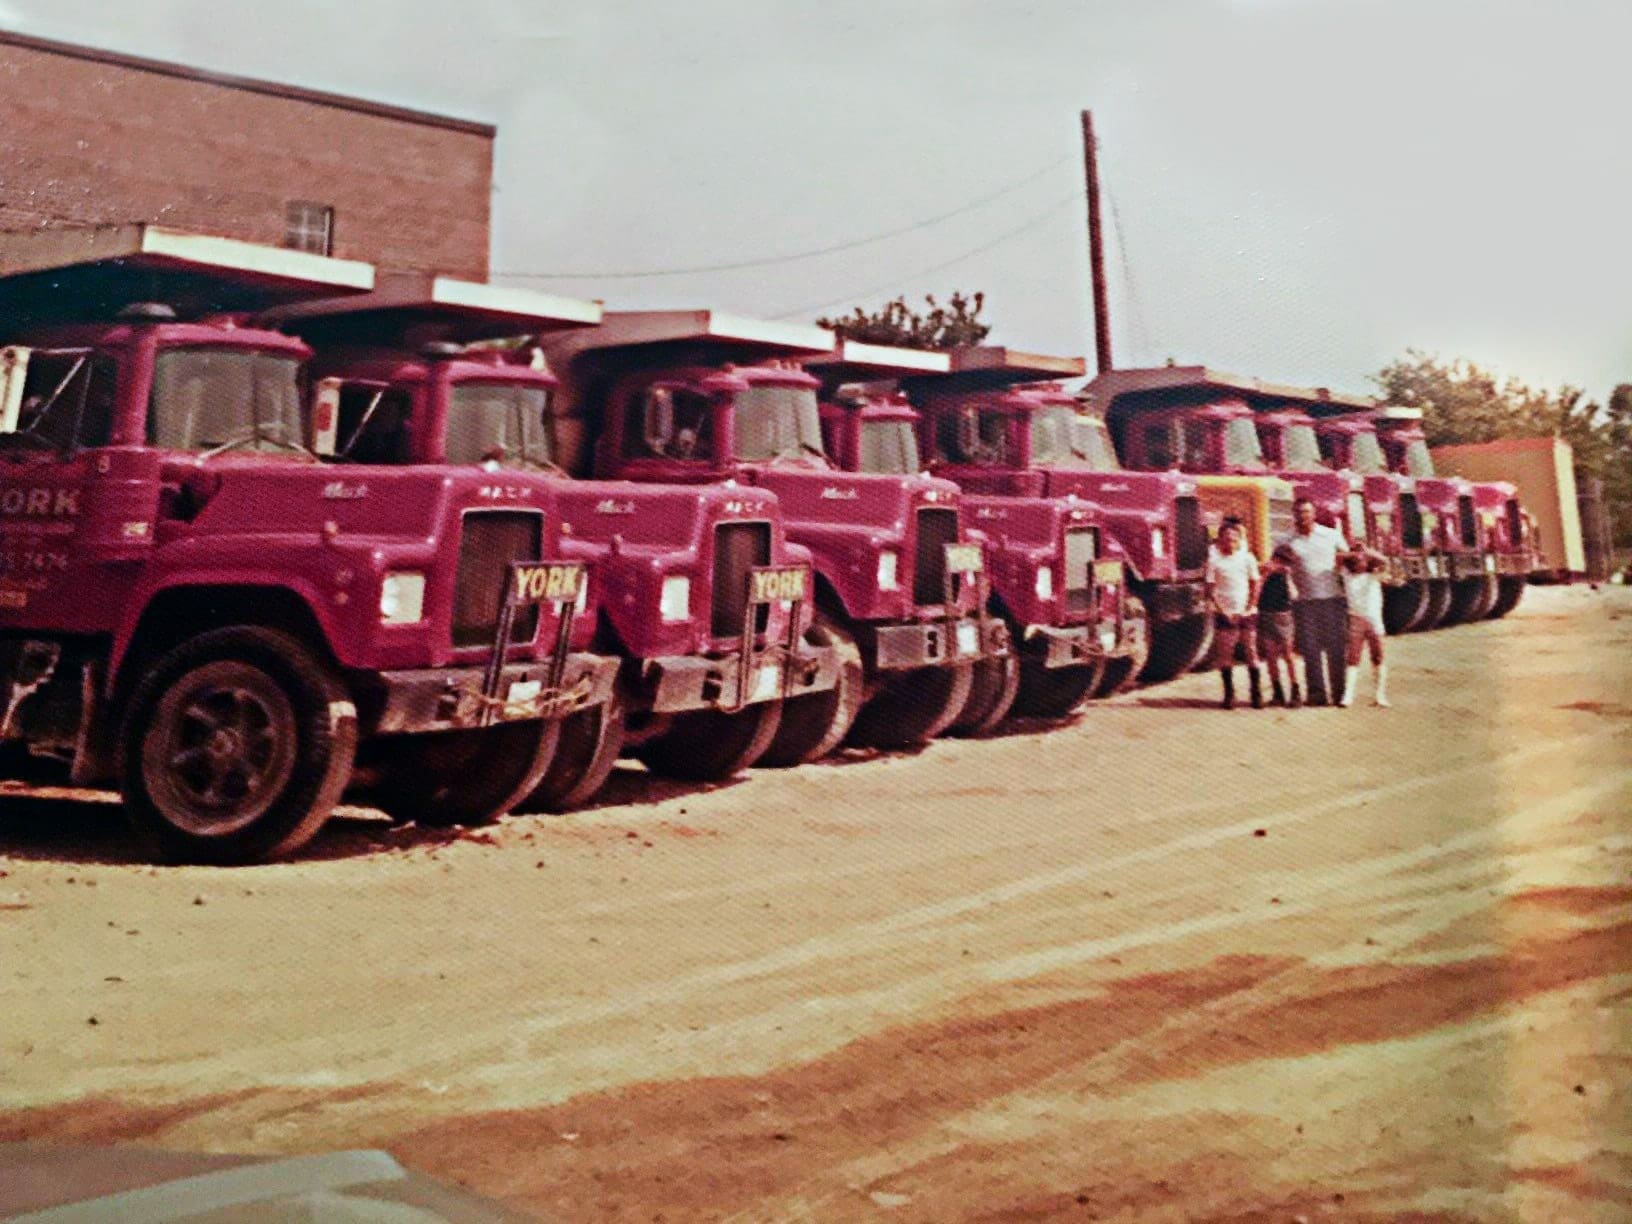 Vintage style photo. Row of red York trucks parked on a dirt driveway with Santo, York's founder, and his three sons standing in front.